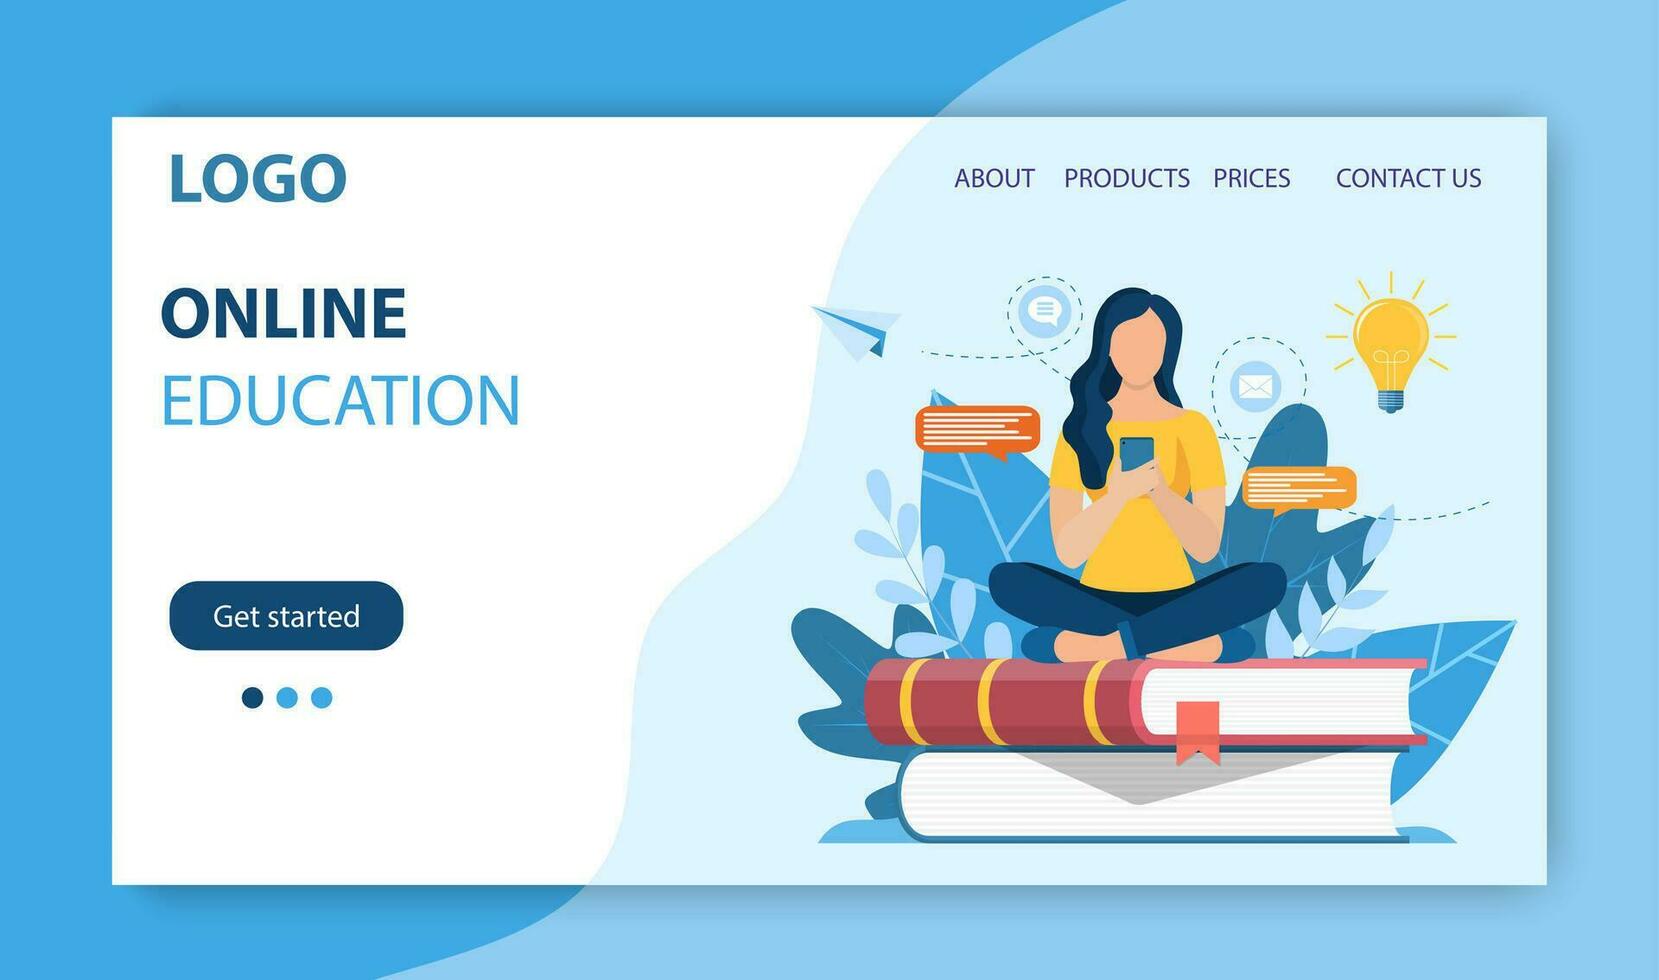 Online education landing page. woman sitting on pile of books. Concept illustration for school, education, university. Vector illustration in flat style.